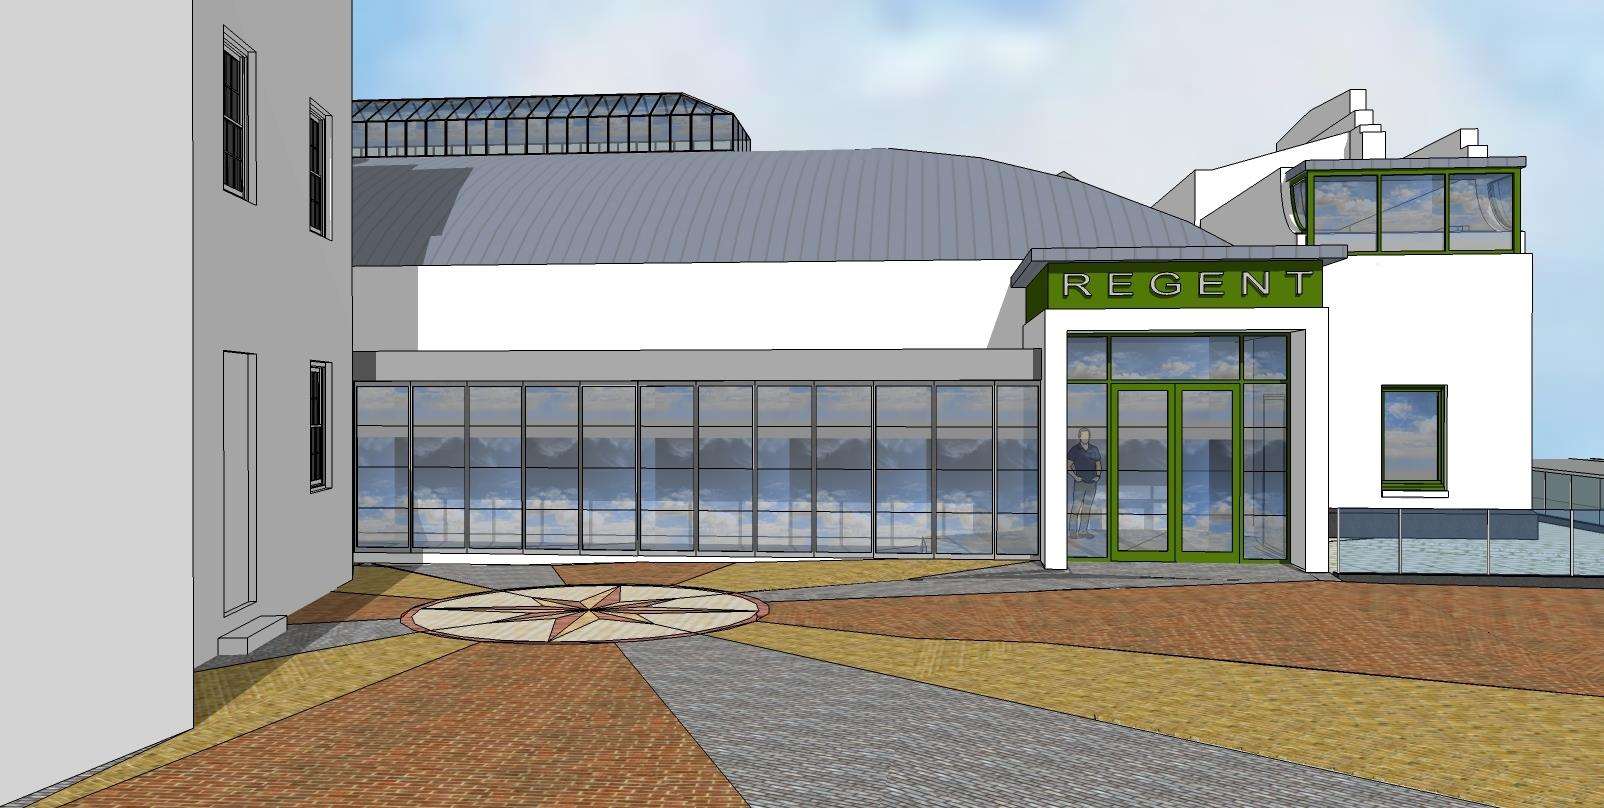 Deal Town Council is supporting the latest plans for a cinema in the town